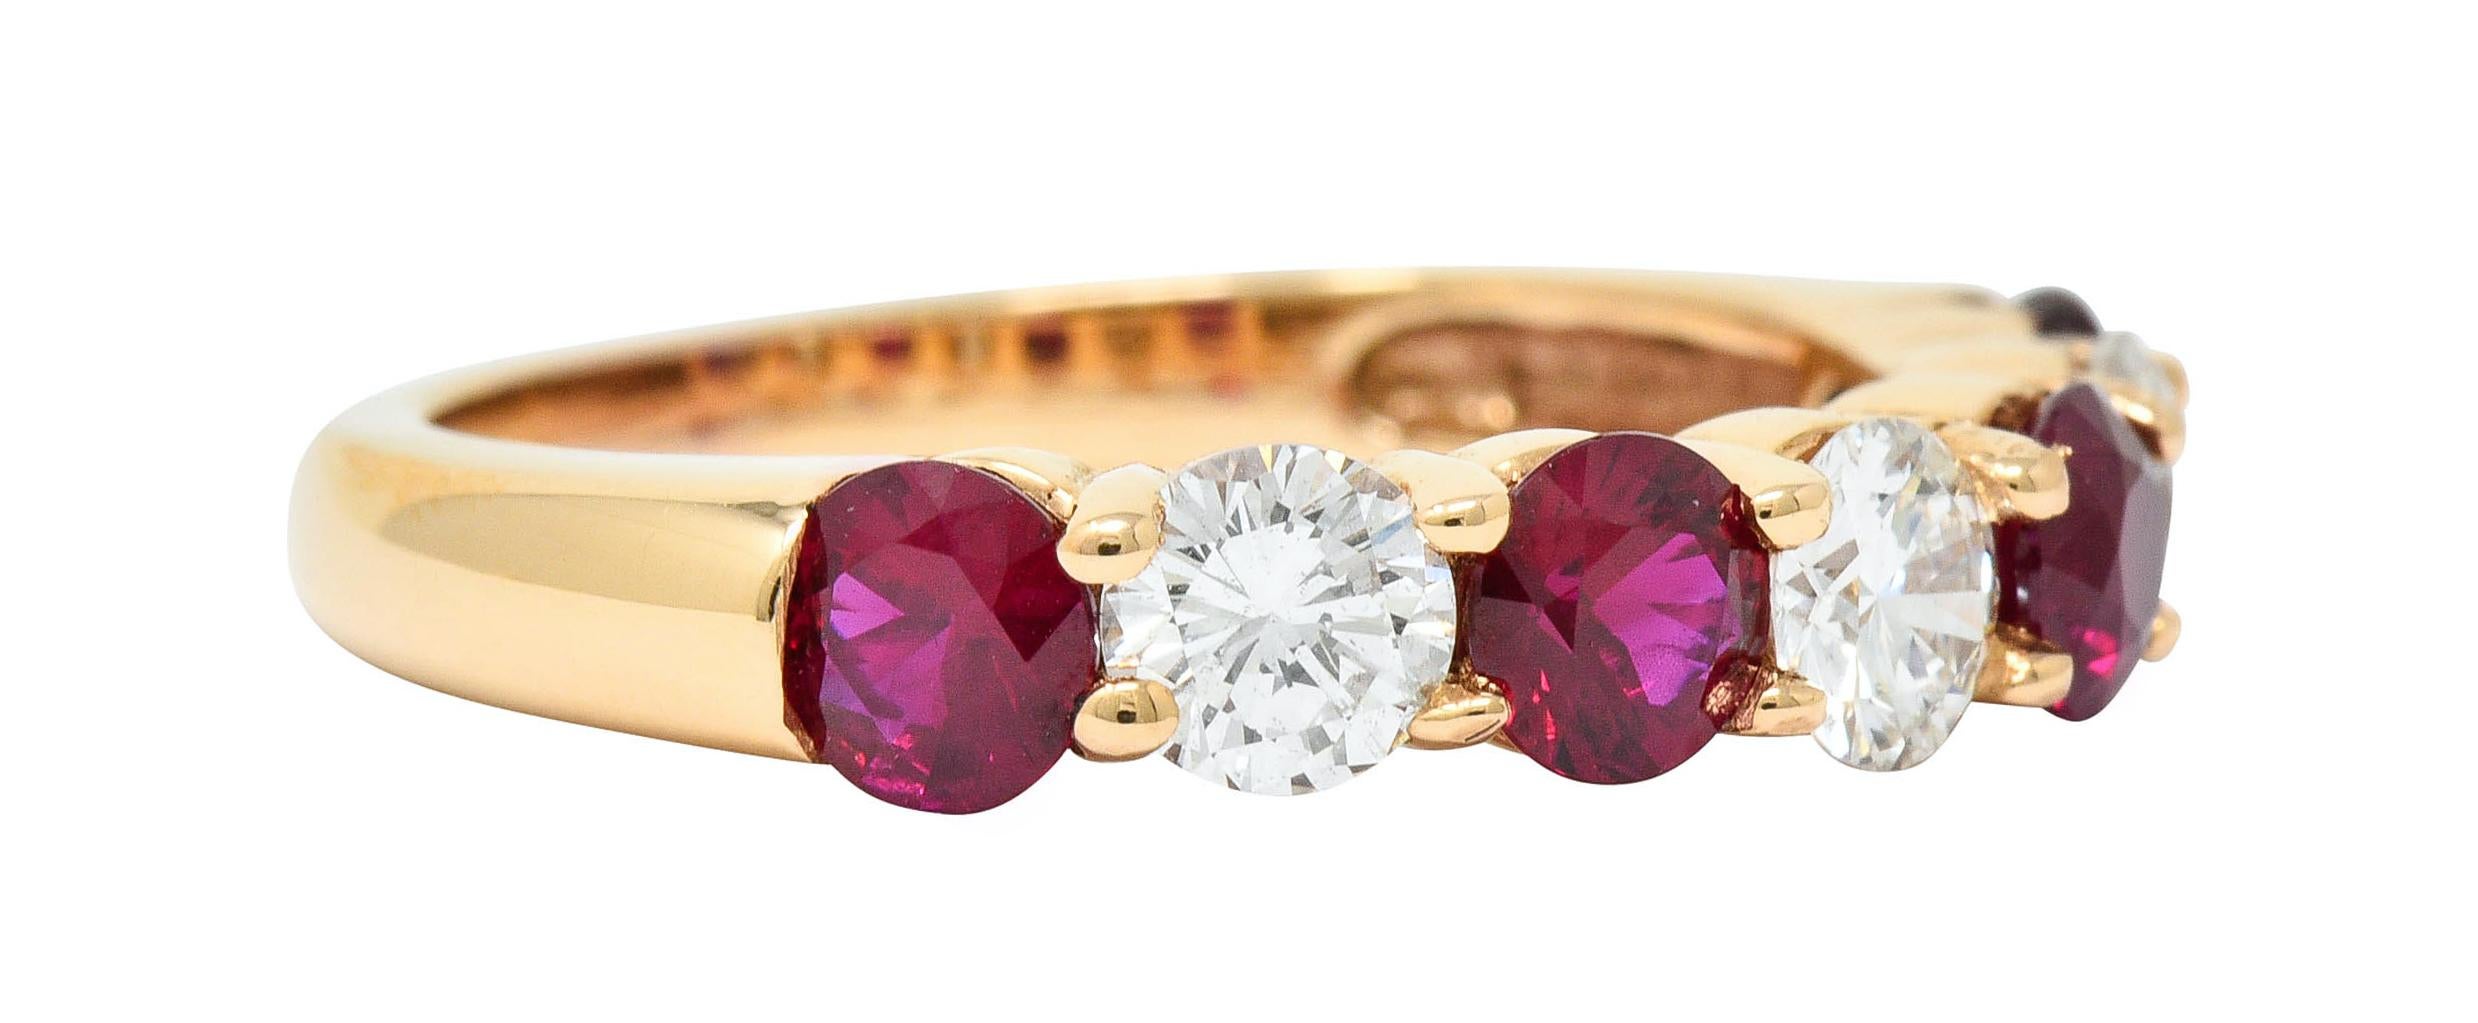 Shared prong band ring is set to front with round cut rubies and diamonds, alternating

Rubies are a very well-matched red color and weigh approximately 1.20 carats total

Diamonds weigh in total approximately 0.72 carat with G to I color and VS